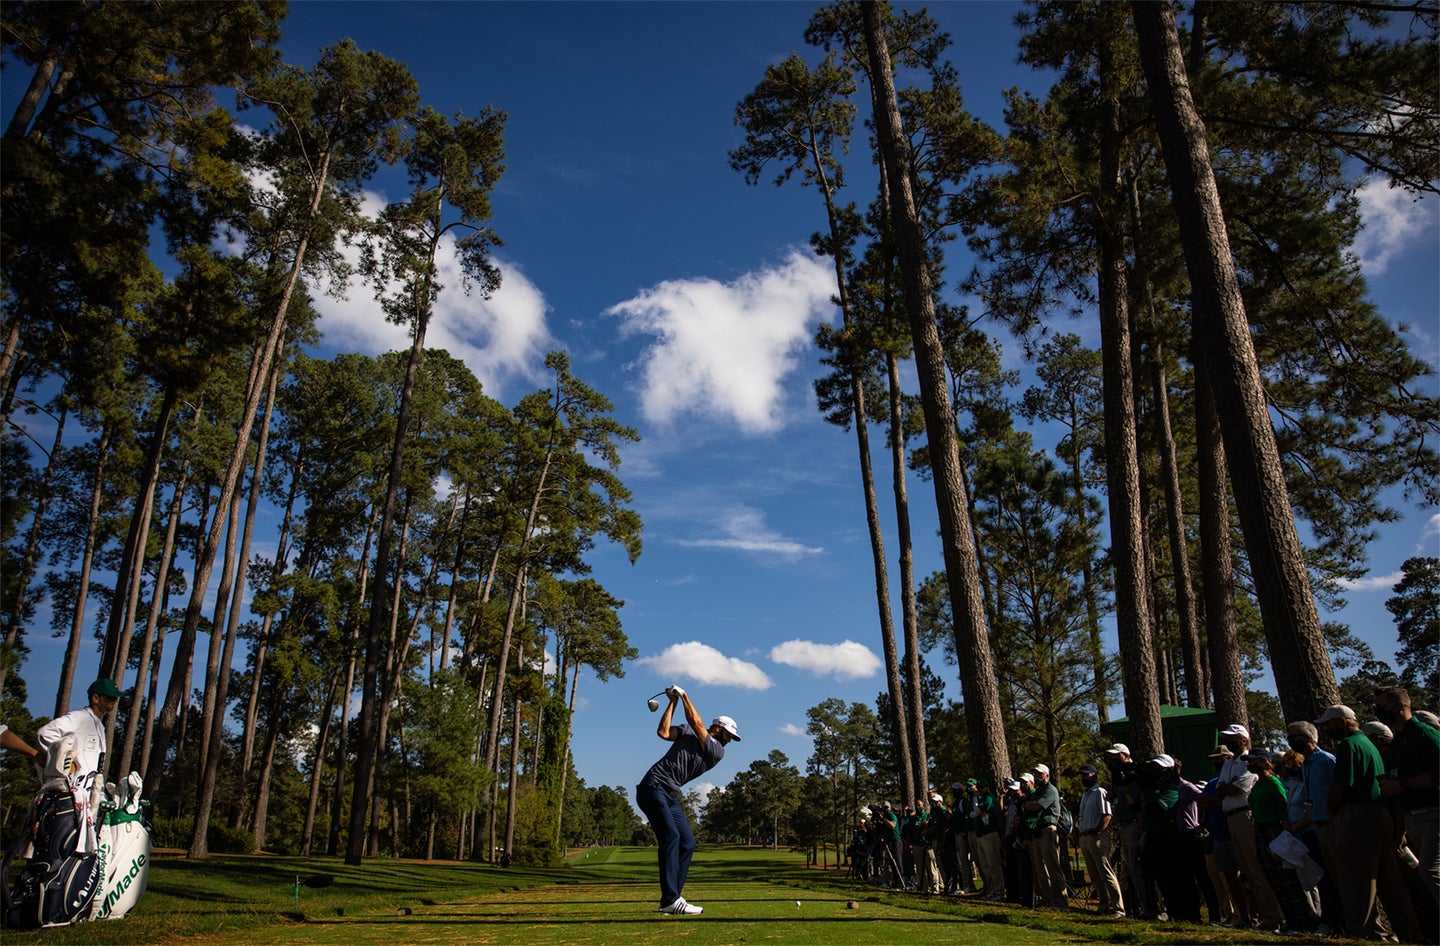 A golfer teeing off between tall trees.